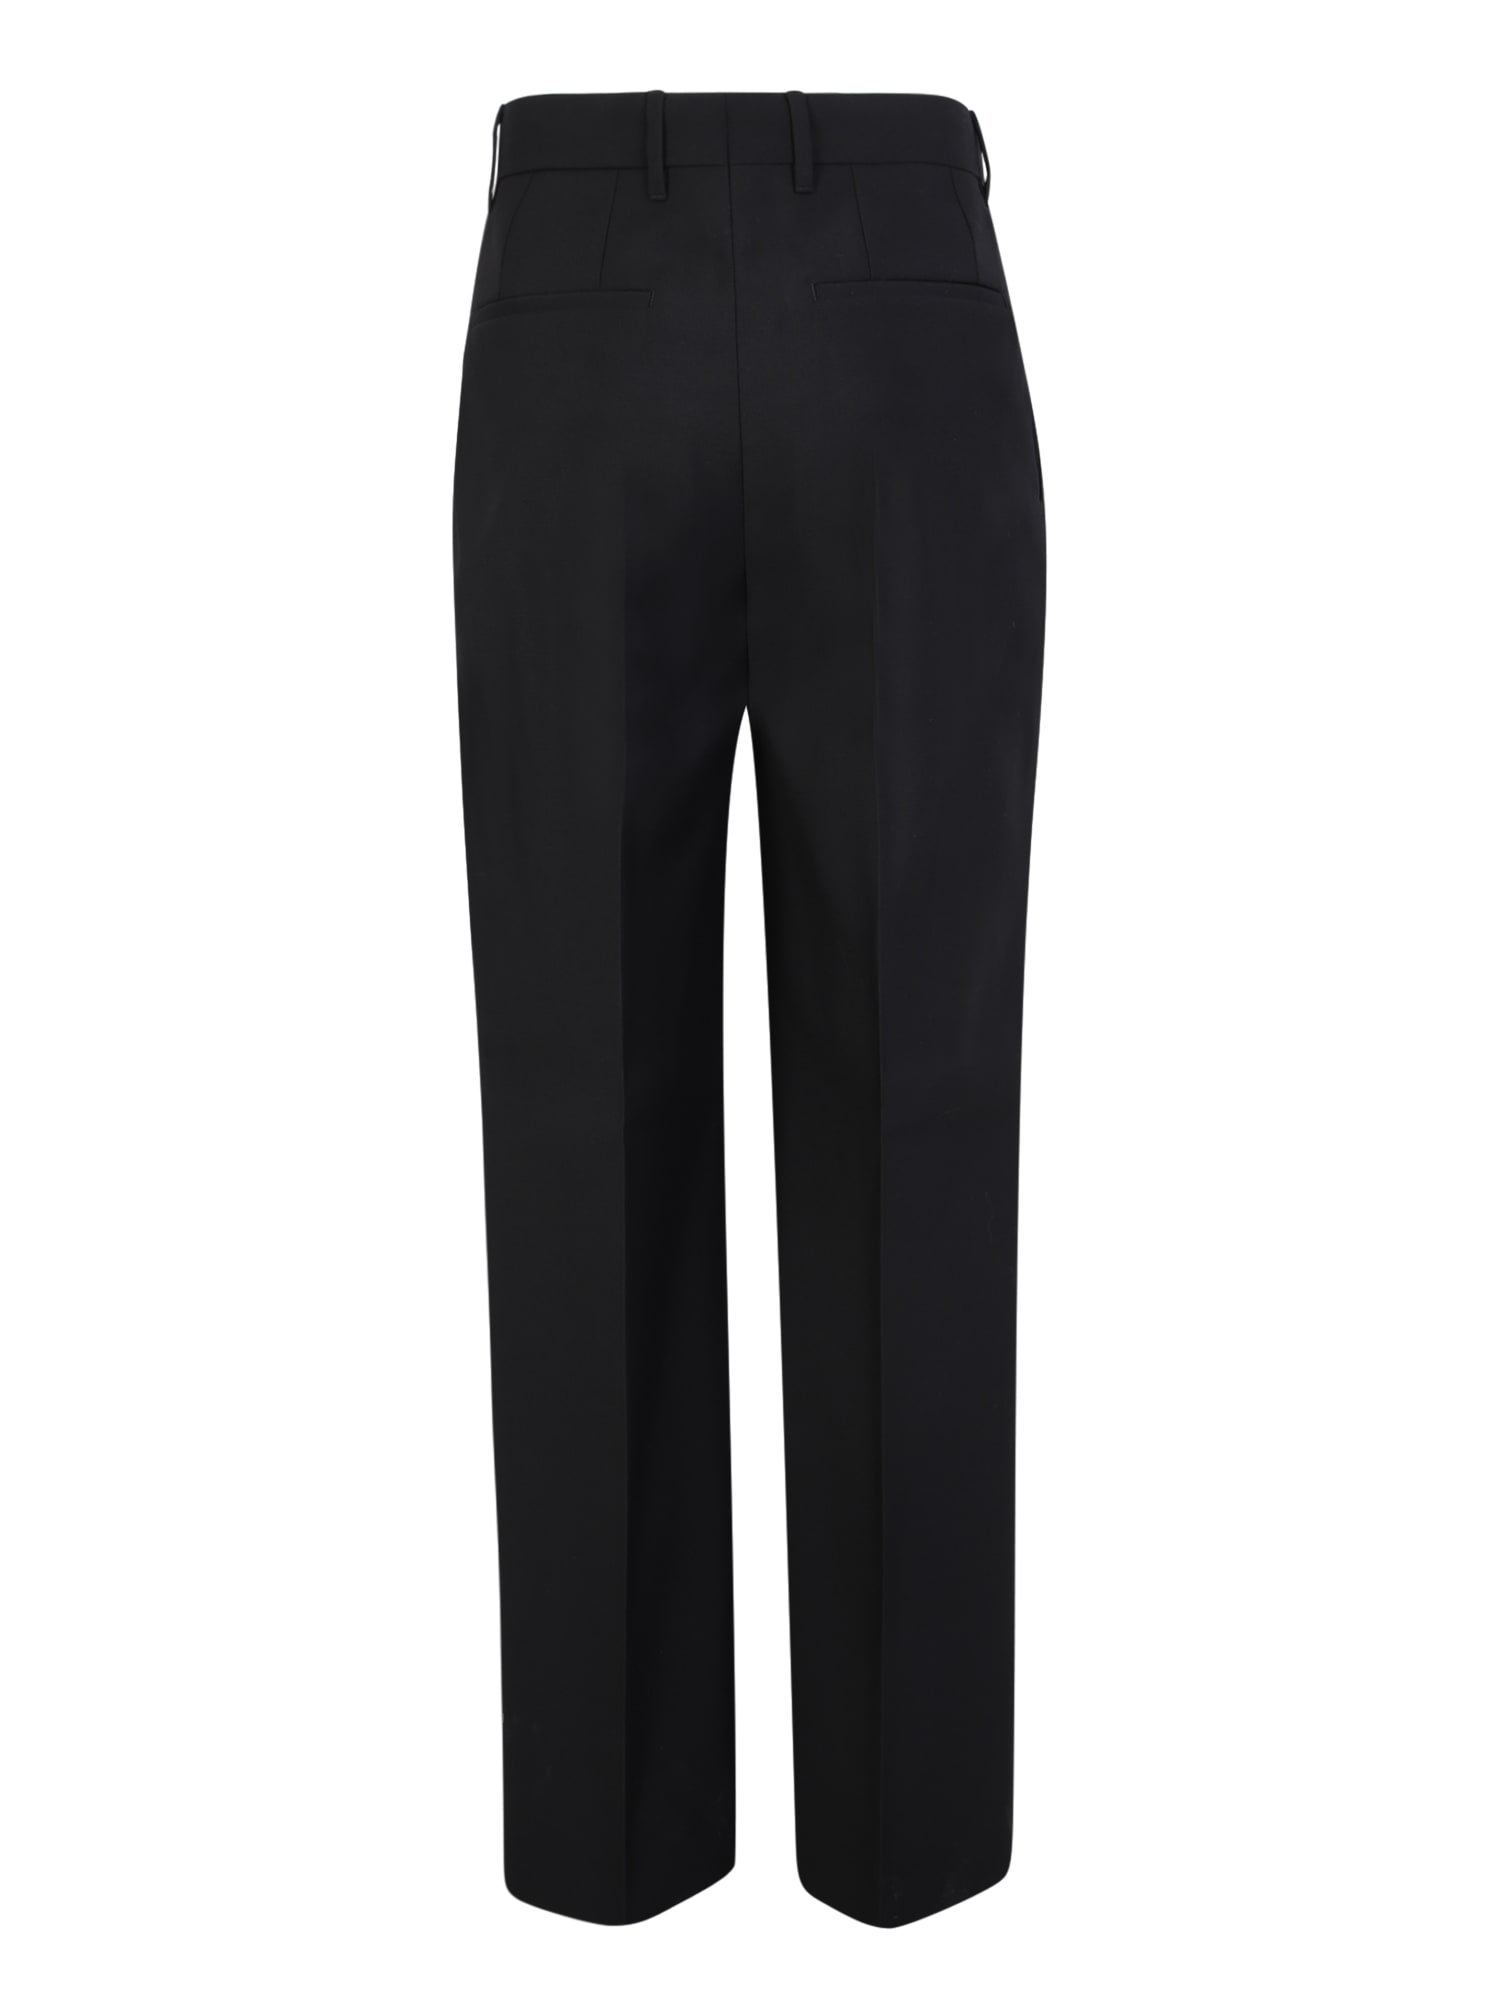 Shop Burberry Black Tailored Trousers